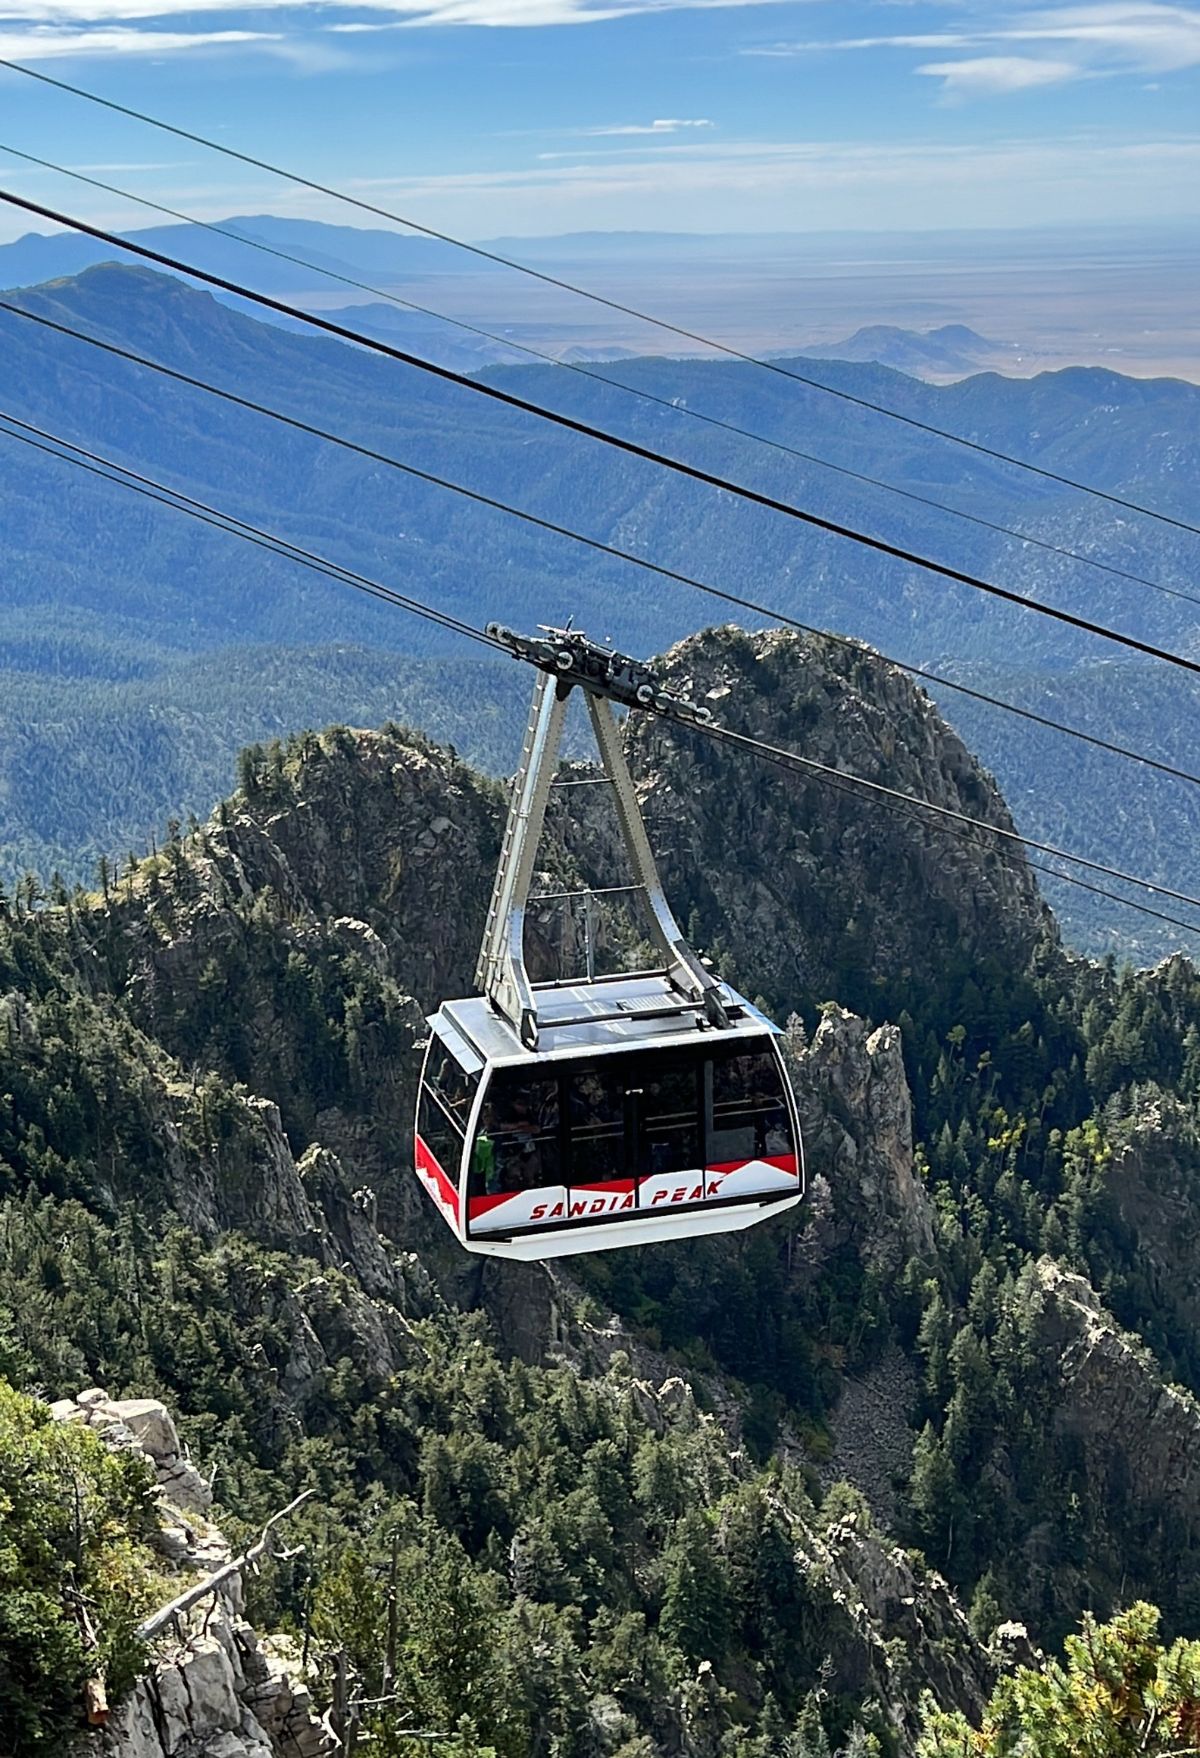 A gondola is flying over a mountain with mountains in the background.